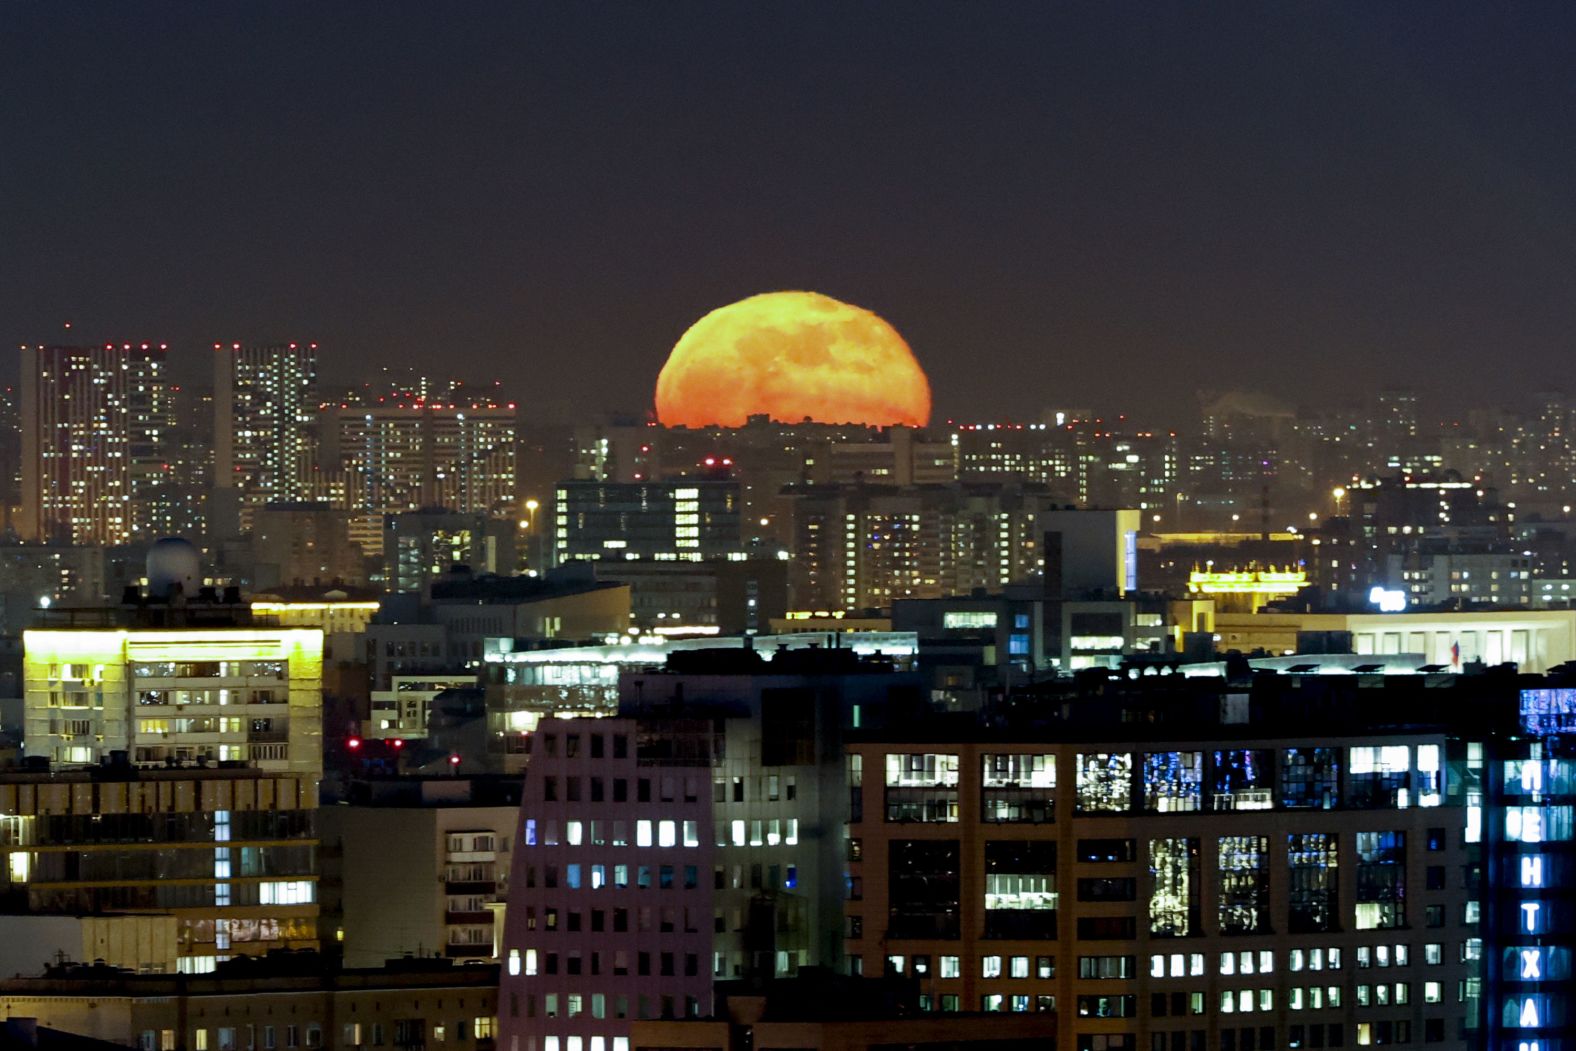 The moon rises over Moscow, Russia.